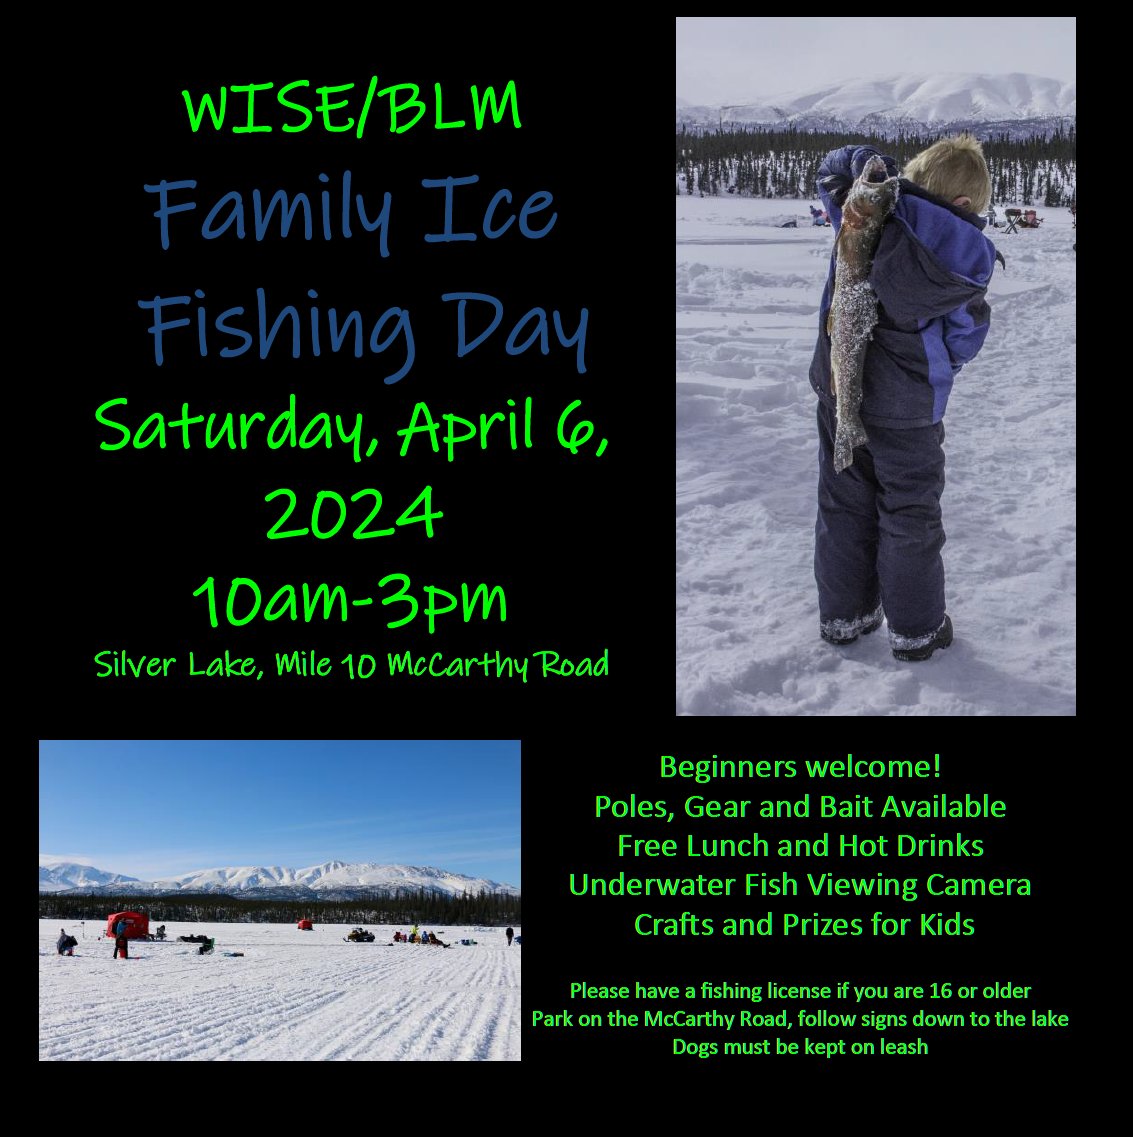 This Saturday, April 6th, from 10 AM - 3 PM, come out and learn how to ice fish with your family on the McCarthy Road. See flier for details.